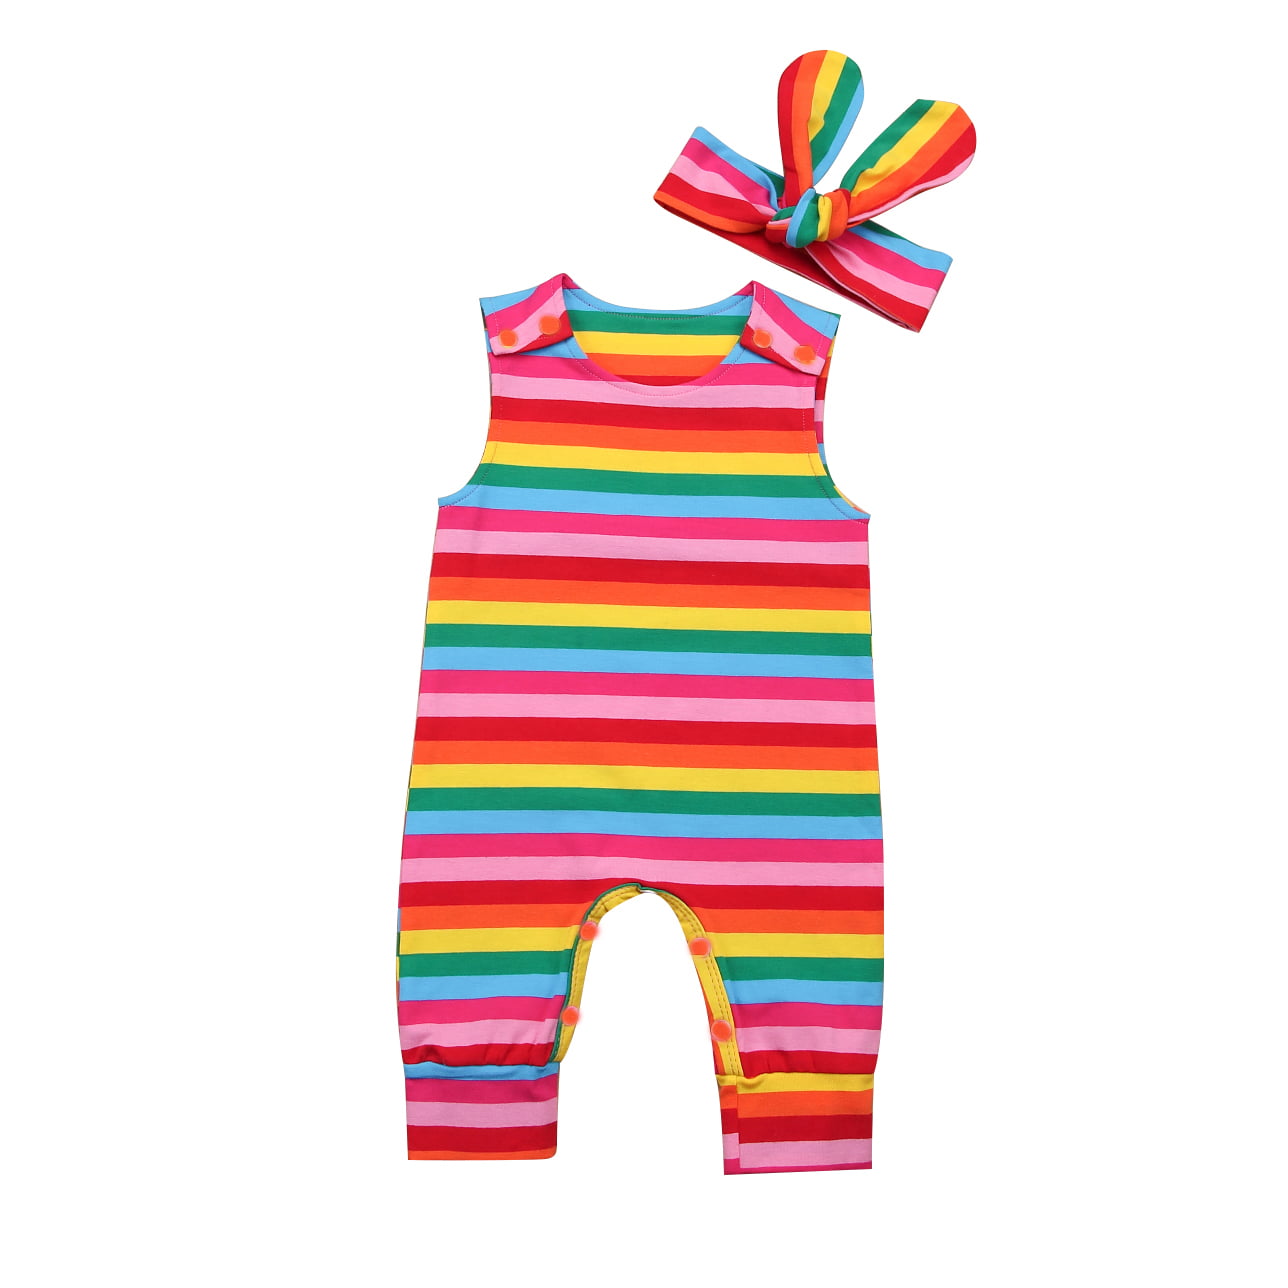 Newborn Toddler Baby Girl's Colorful Stripe Romper Jumpsuit OutfitsClothes Set 